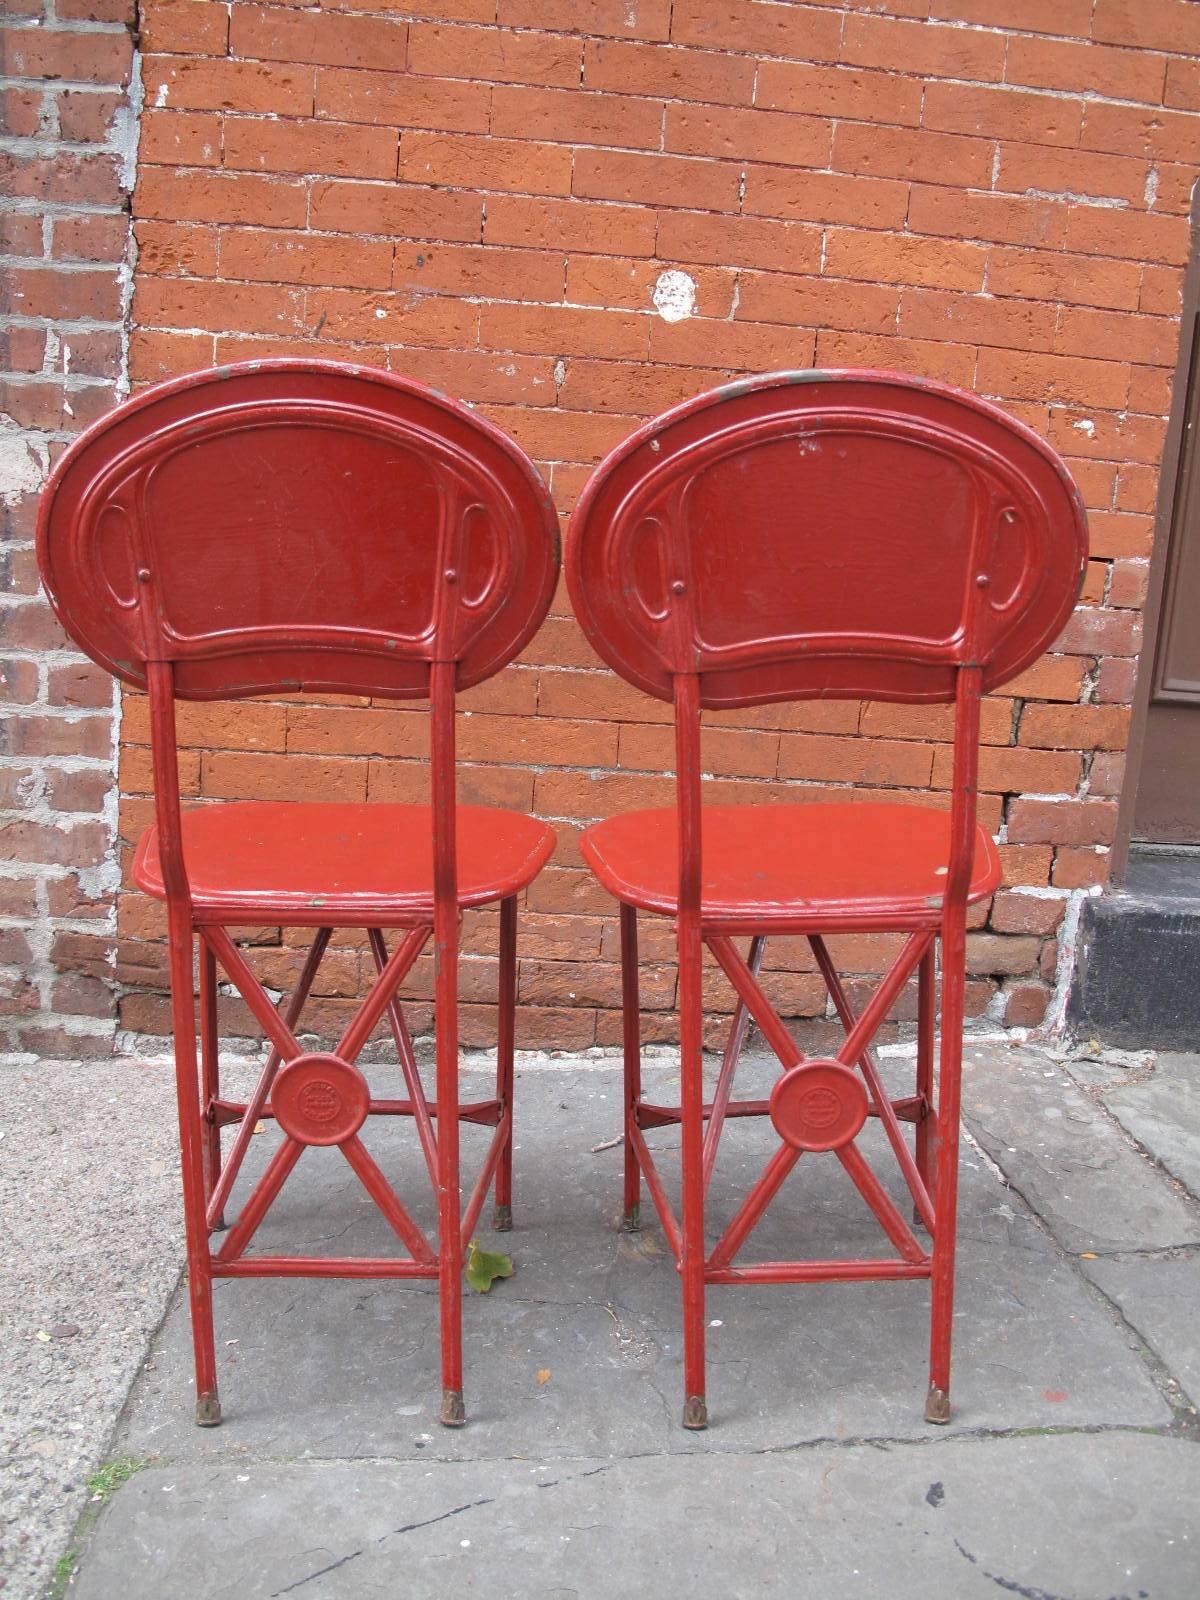 American made folding chairs with original red paint.